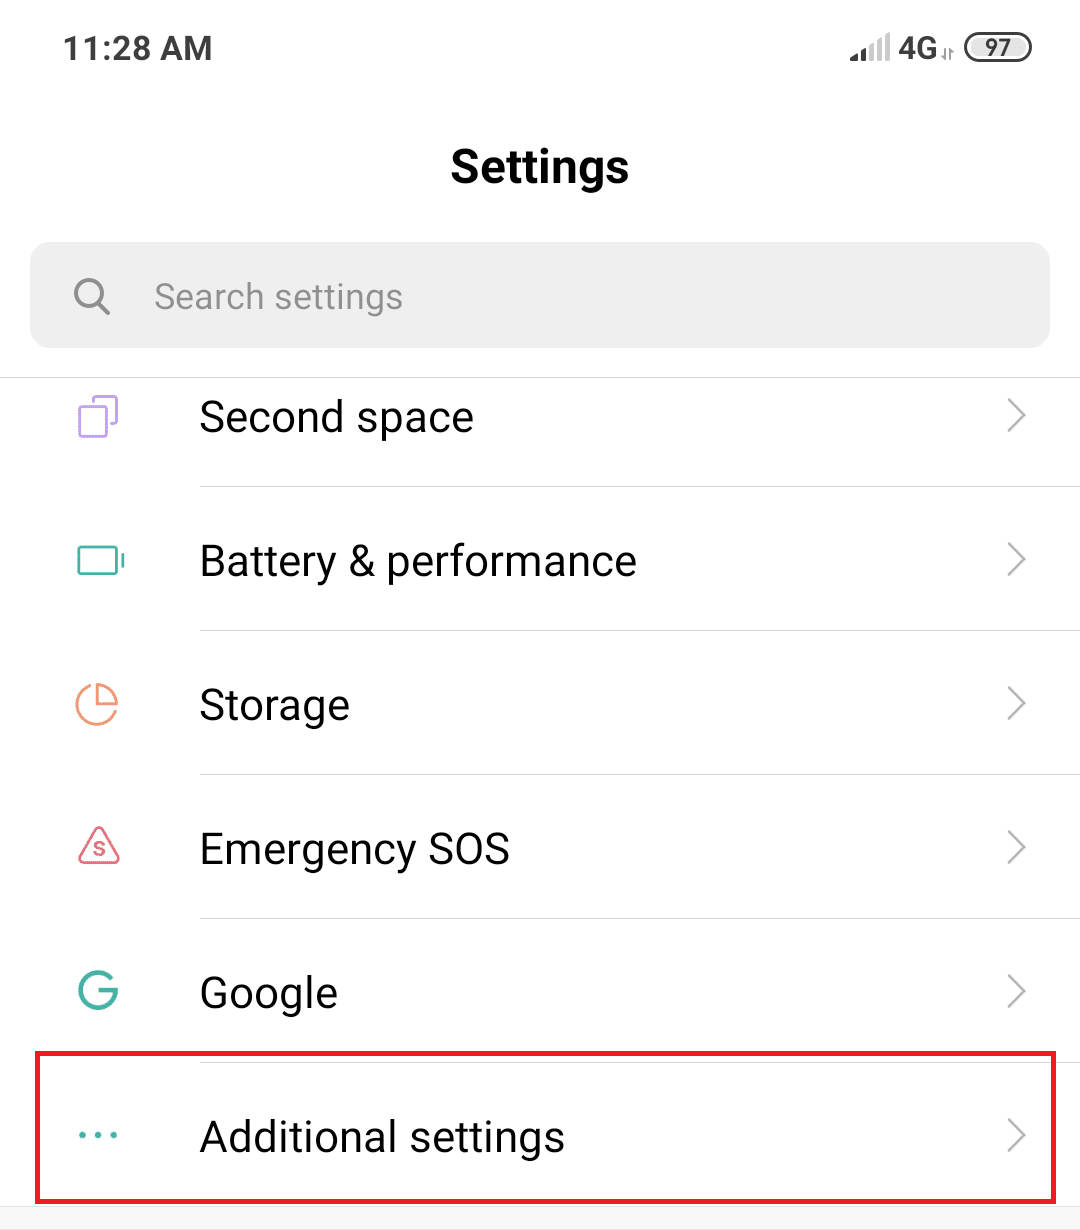 From the Settings screen click on Advanced Settings